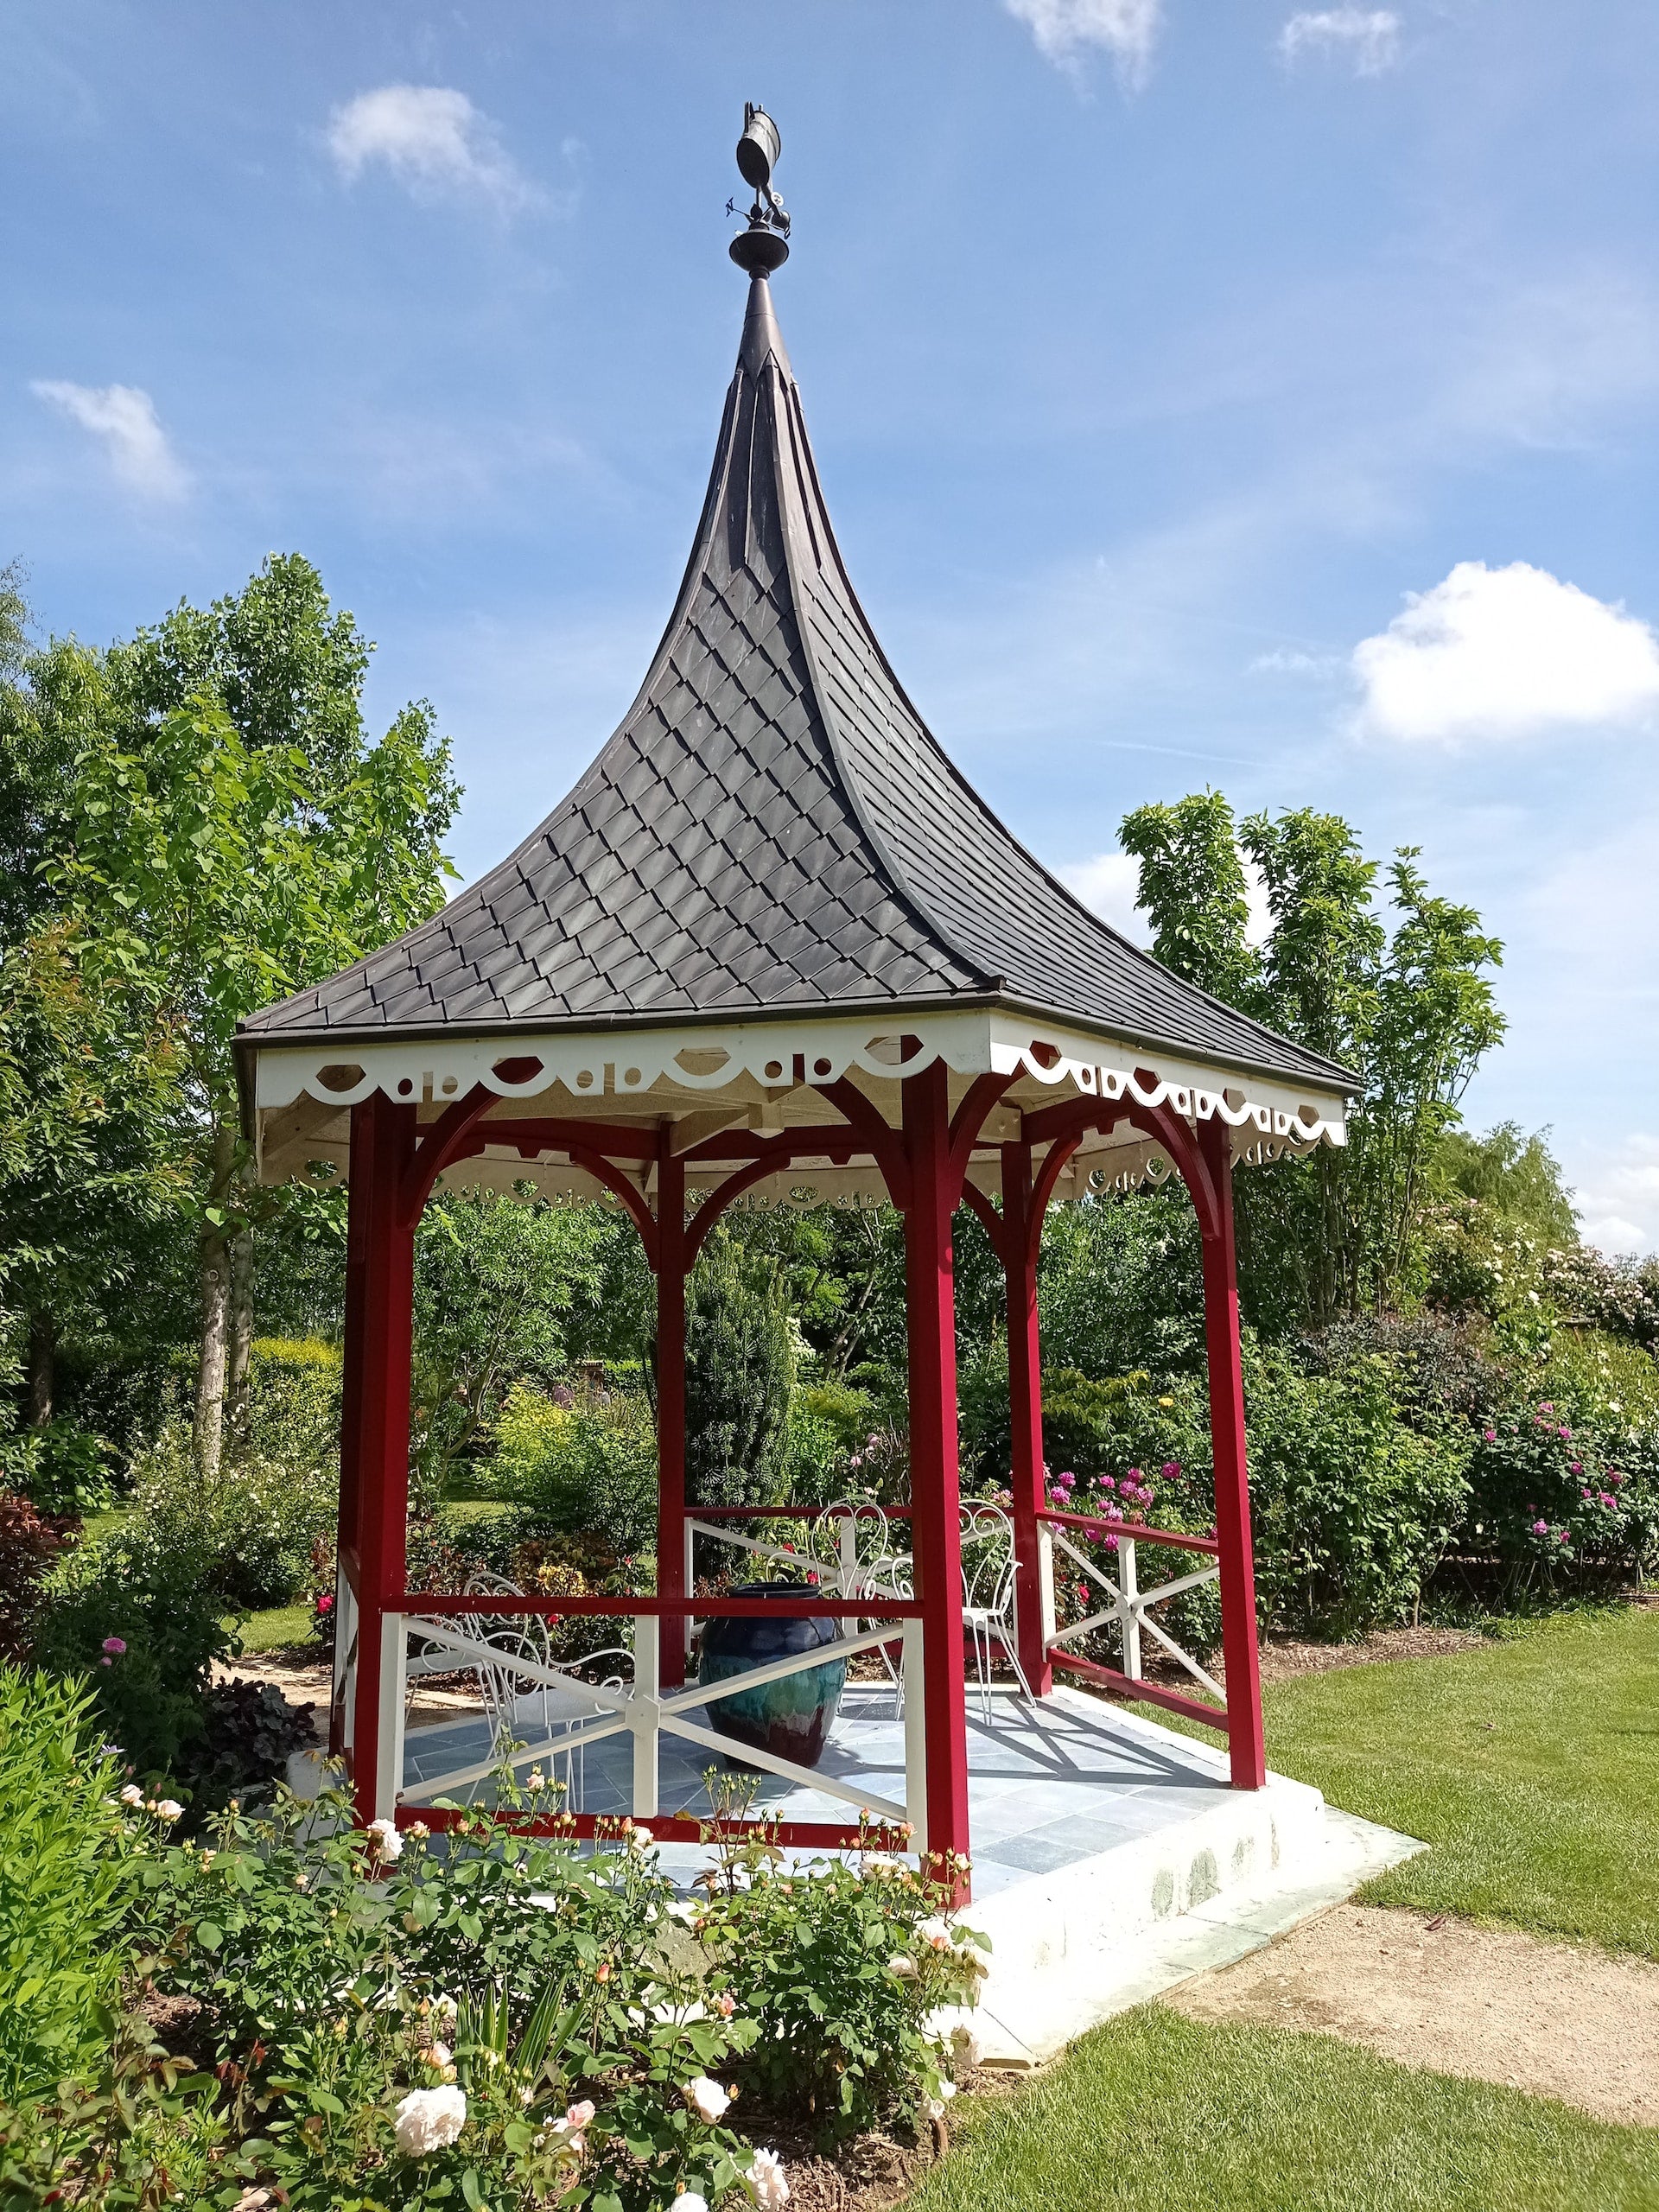 How Do I Keep My Gazebo From Blowing Away - 9 Tips to Follow Caution